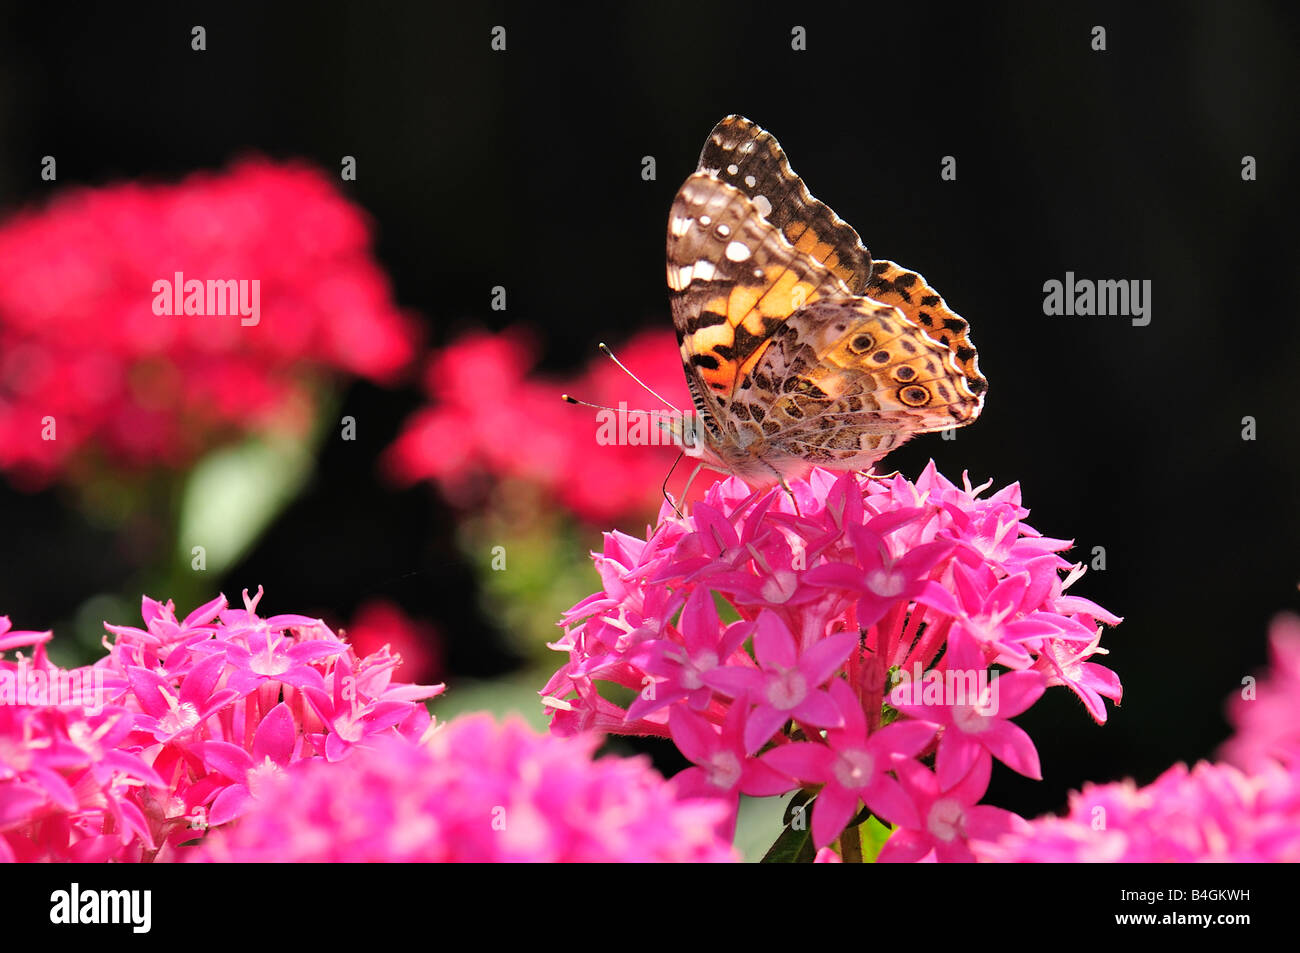 A Painted Lady butterfly, Vanessa cardui, feeds on pink Pentas lanceolata blooms. Oklahoma, USA., Stock Photo